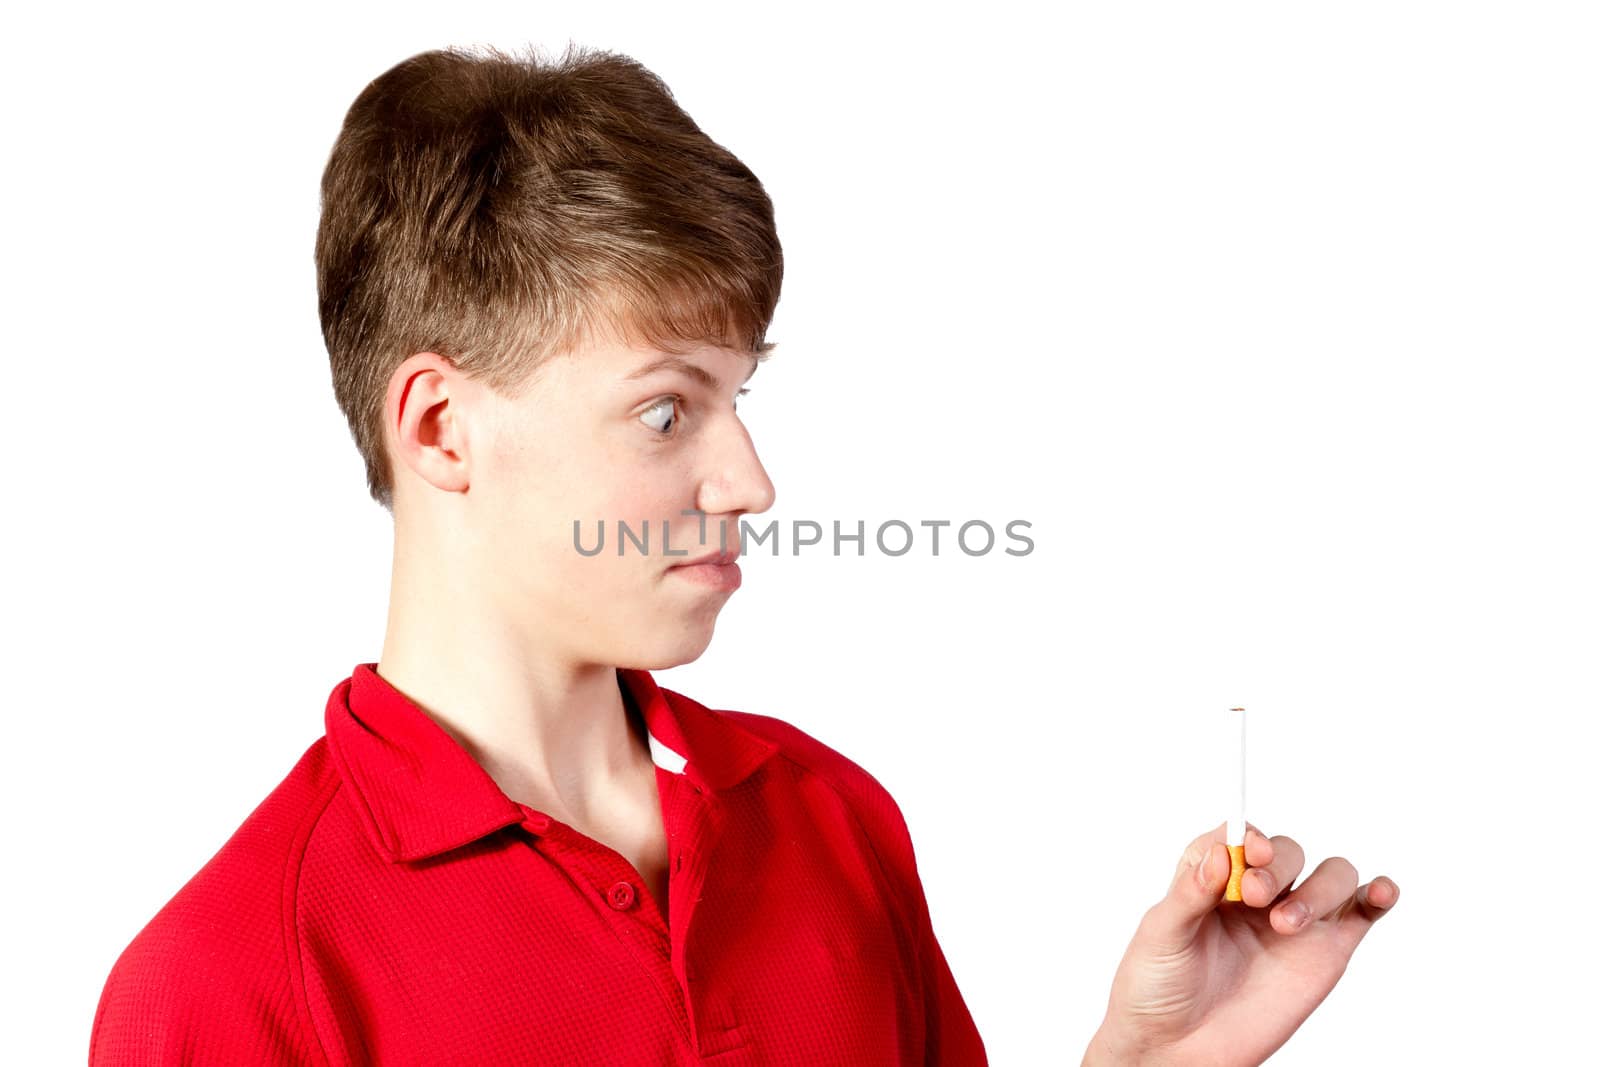 Thoughtful young boy with wide eyes looks at a cigarette